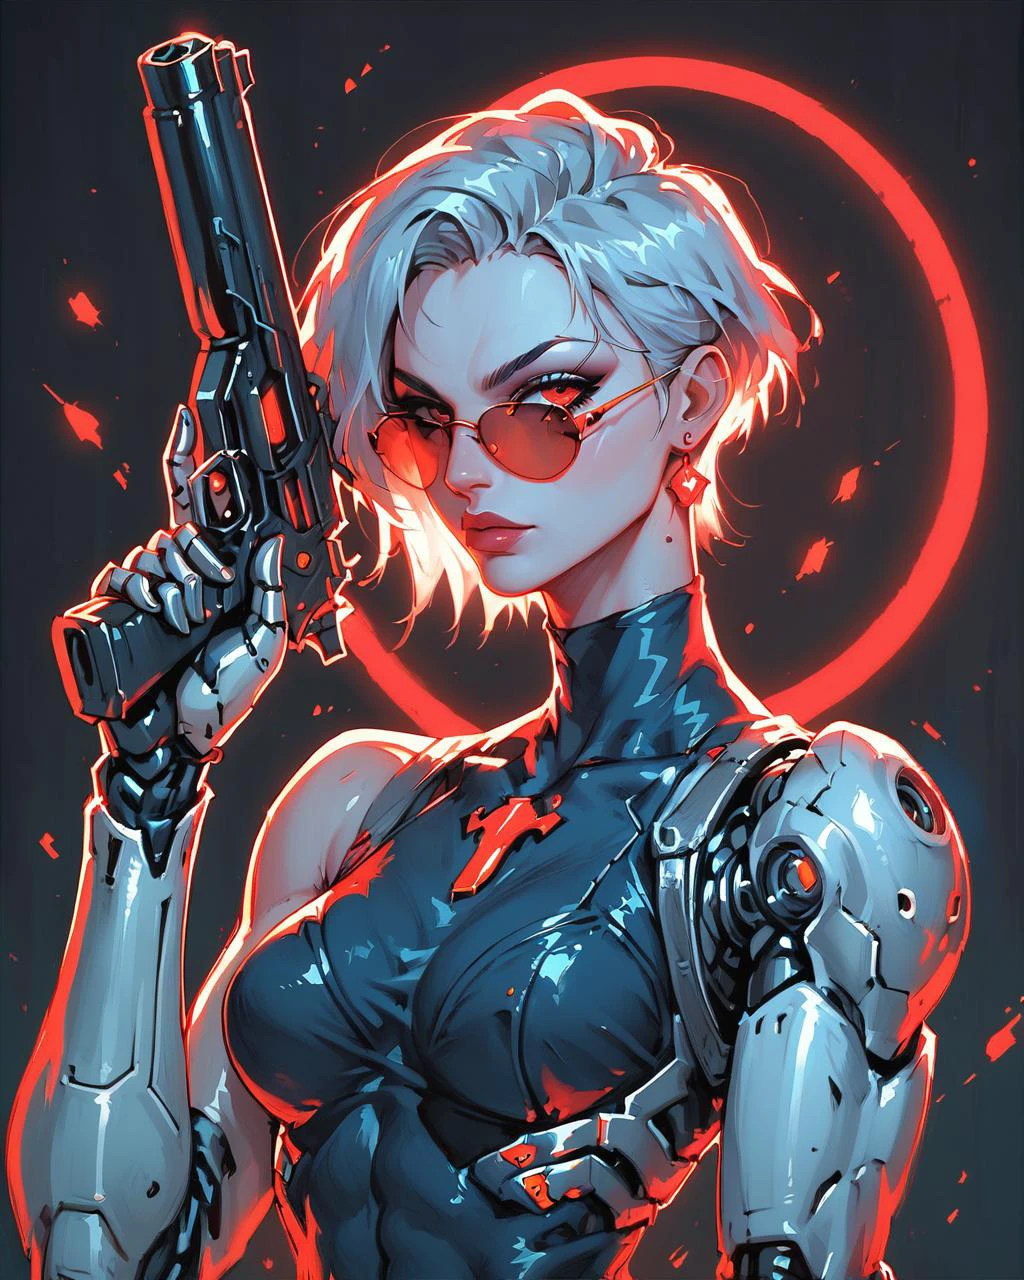 (score_9_up, score_8_up:1.2), score_7_up, (solo), (cyborg girl:1.2) , (athletic), (very detailed), (short hair), (large breasts), (dramatic pose:1.4), (holds tightly big gun), r3dgl0w, (glowing:1.2) red eyes, [sunglasses], red circle at background, black background, Vintage, 1990s \(style\), from side, upper body,
